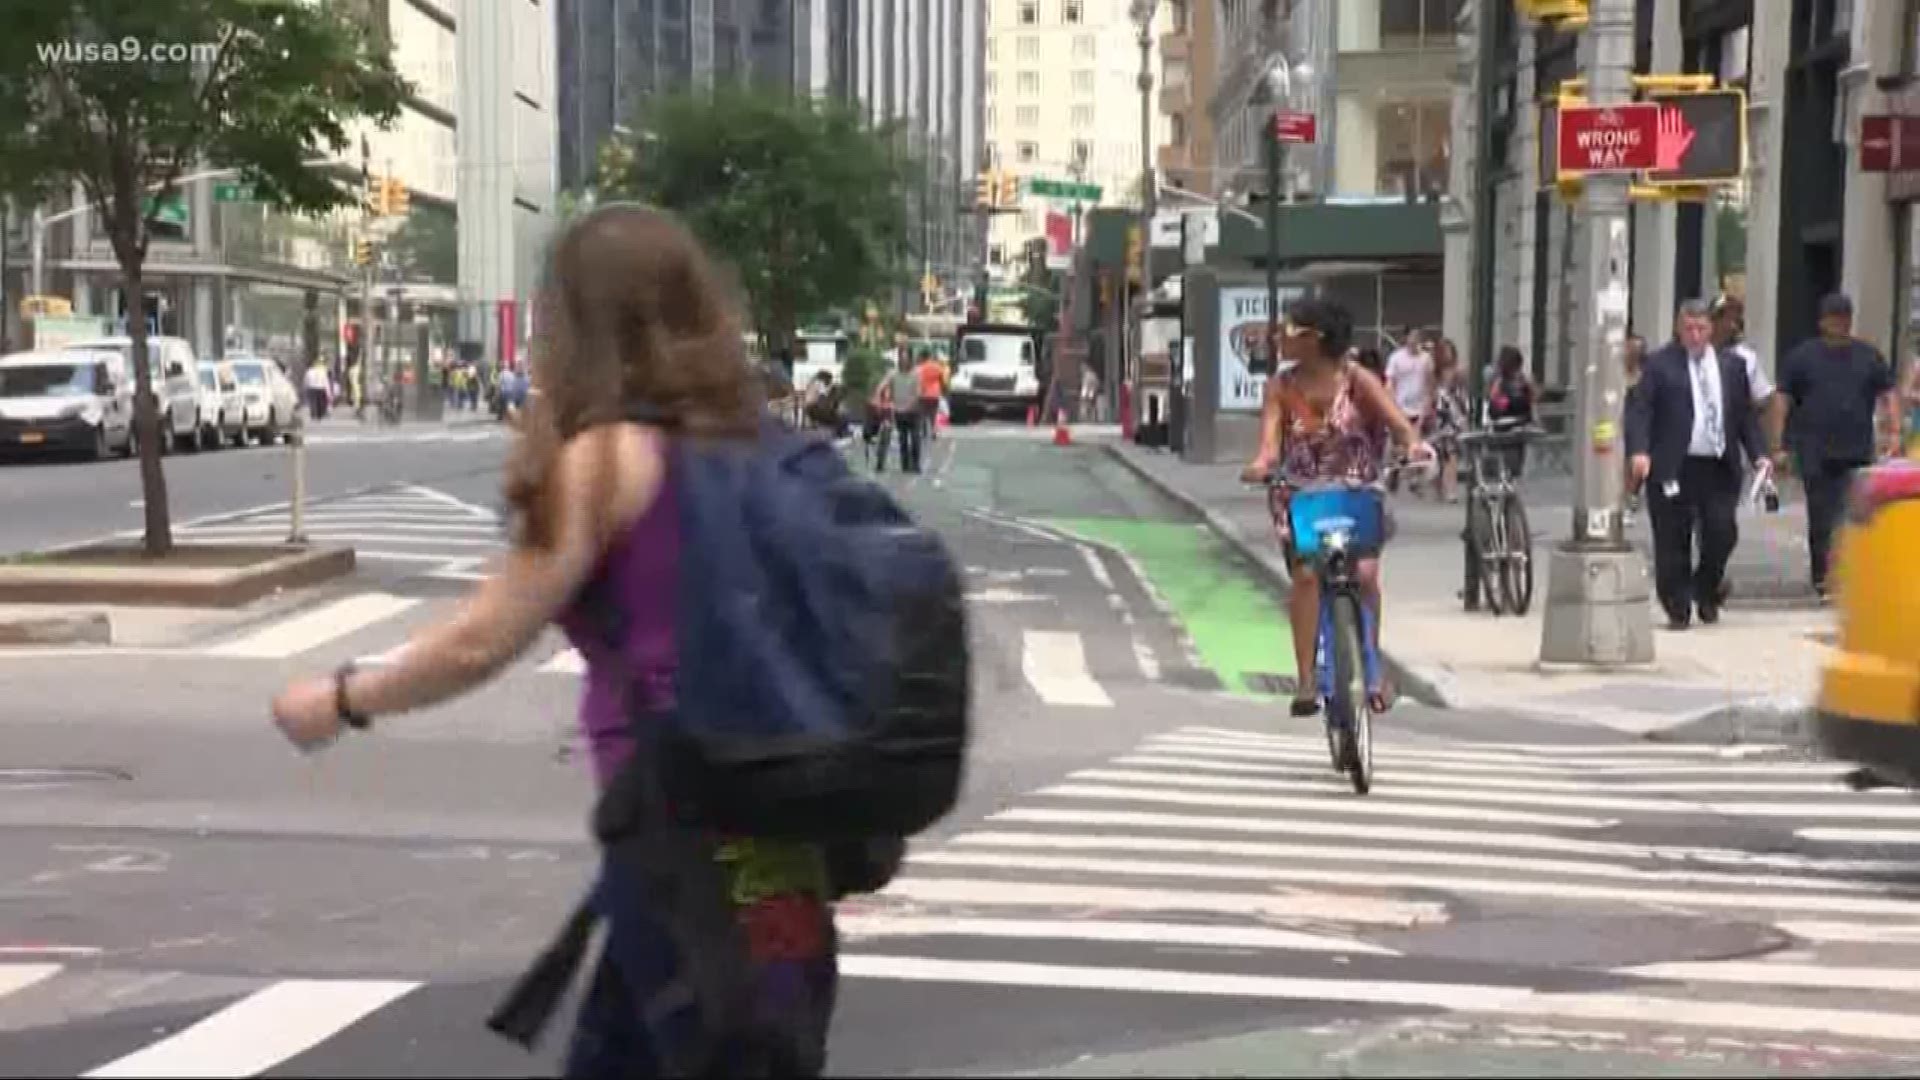 New research calls into question the safety of raised bike lanes